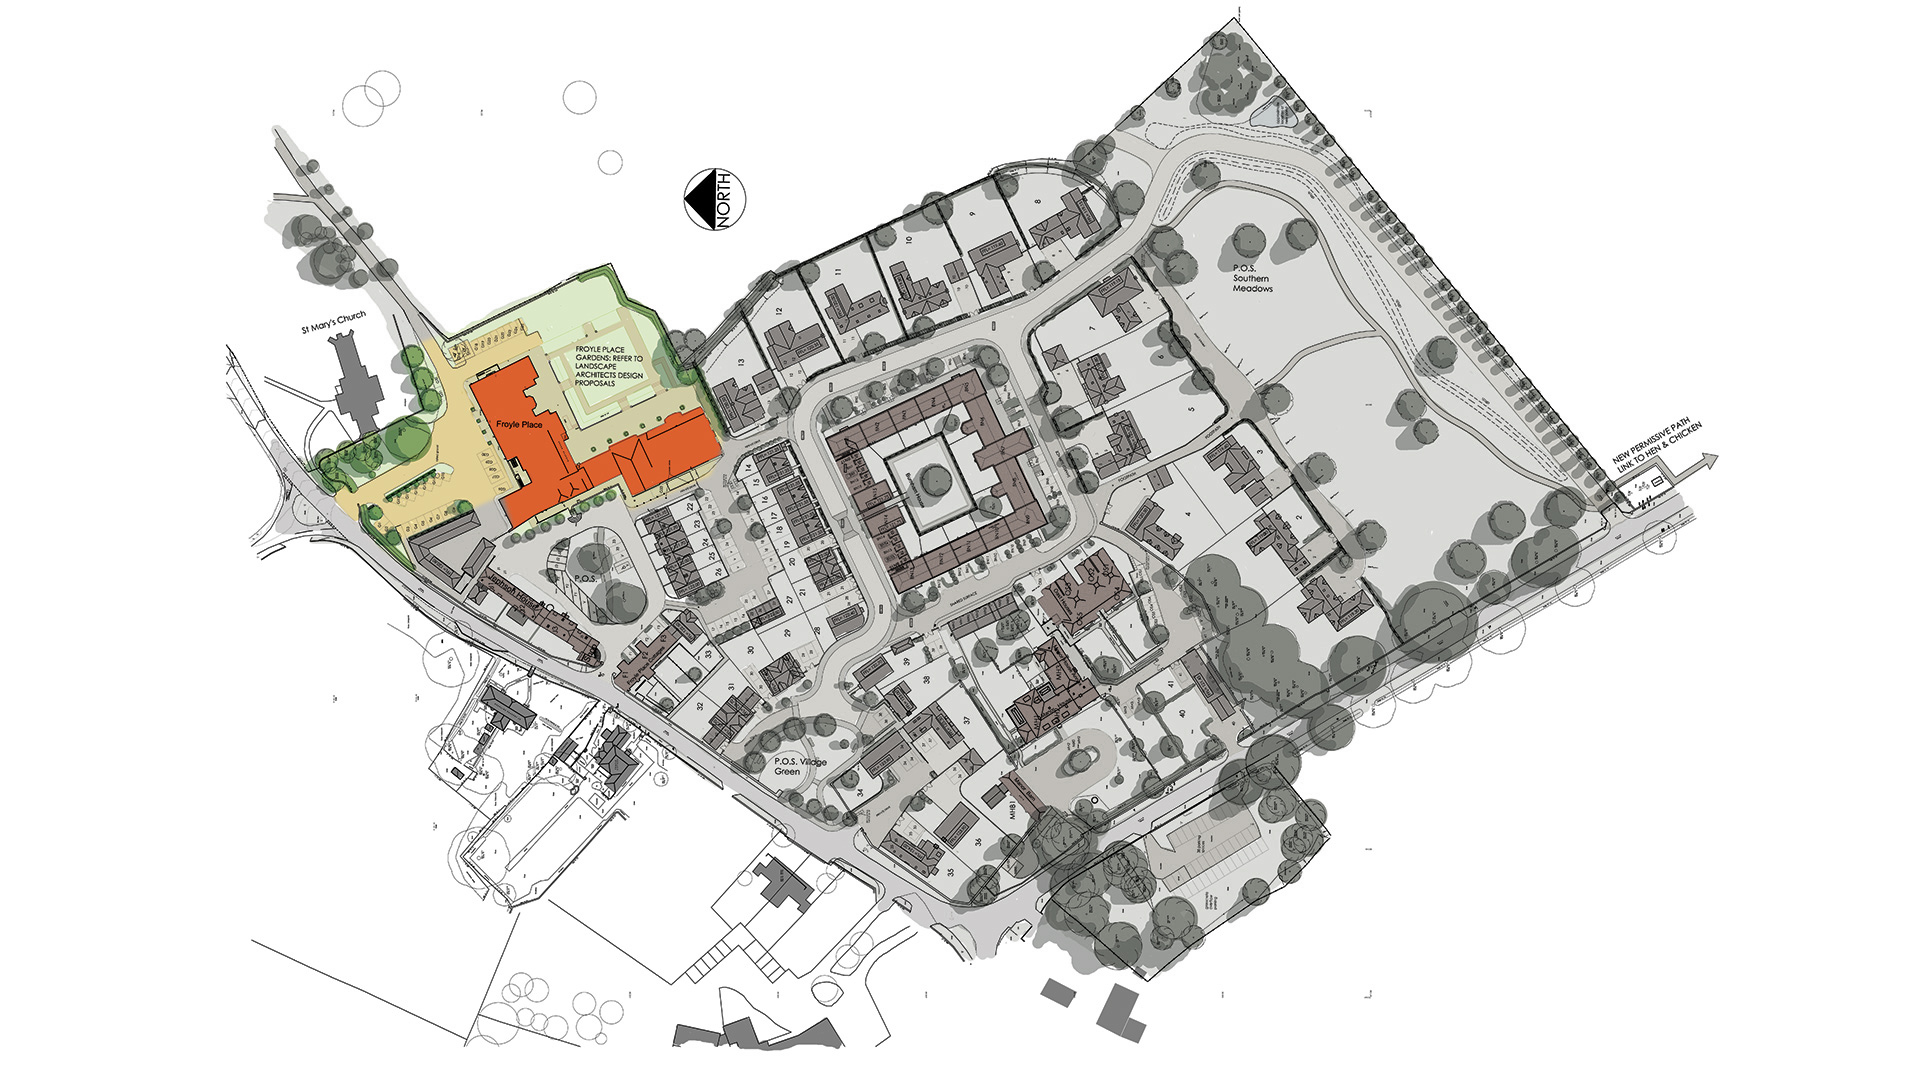 site plan of manor house with large gardens